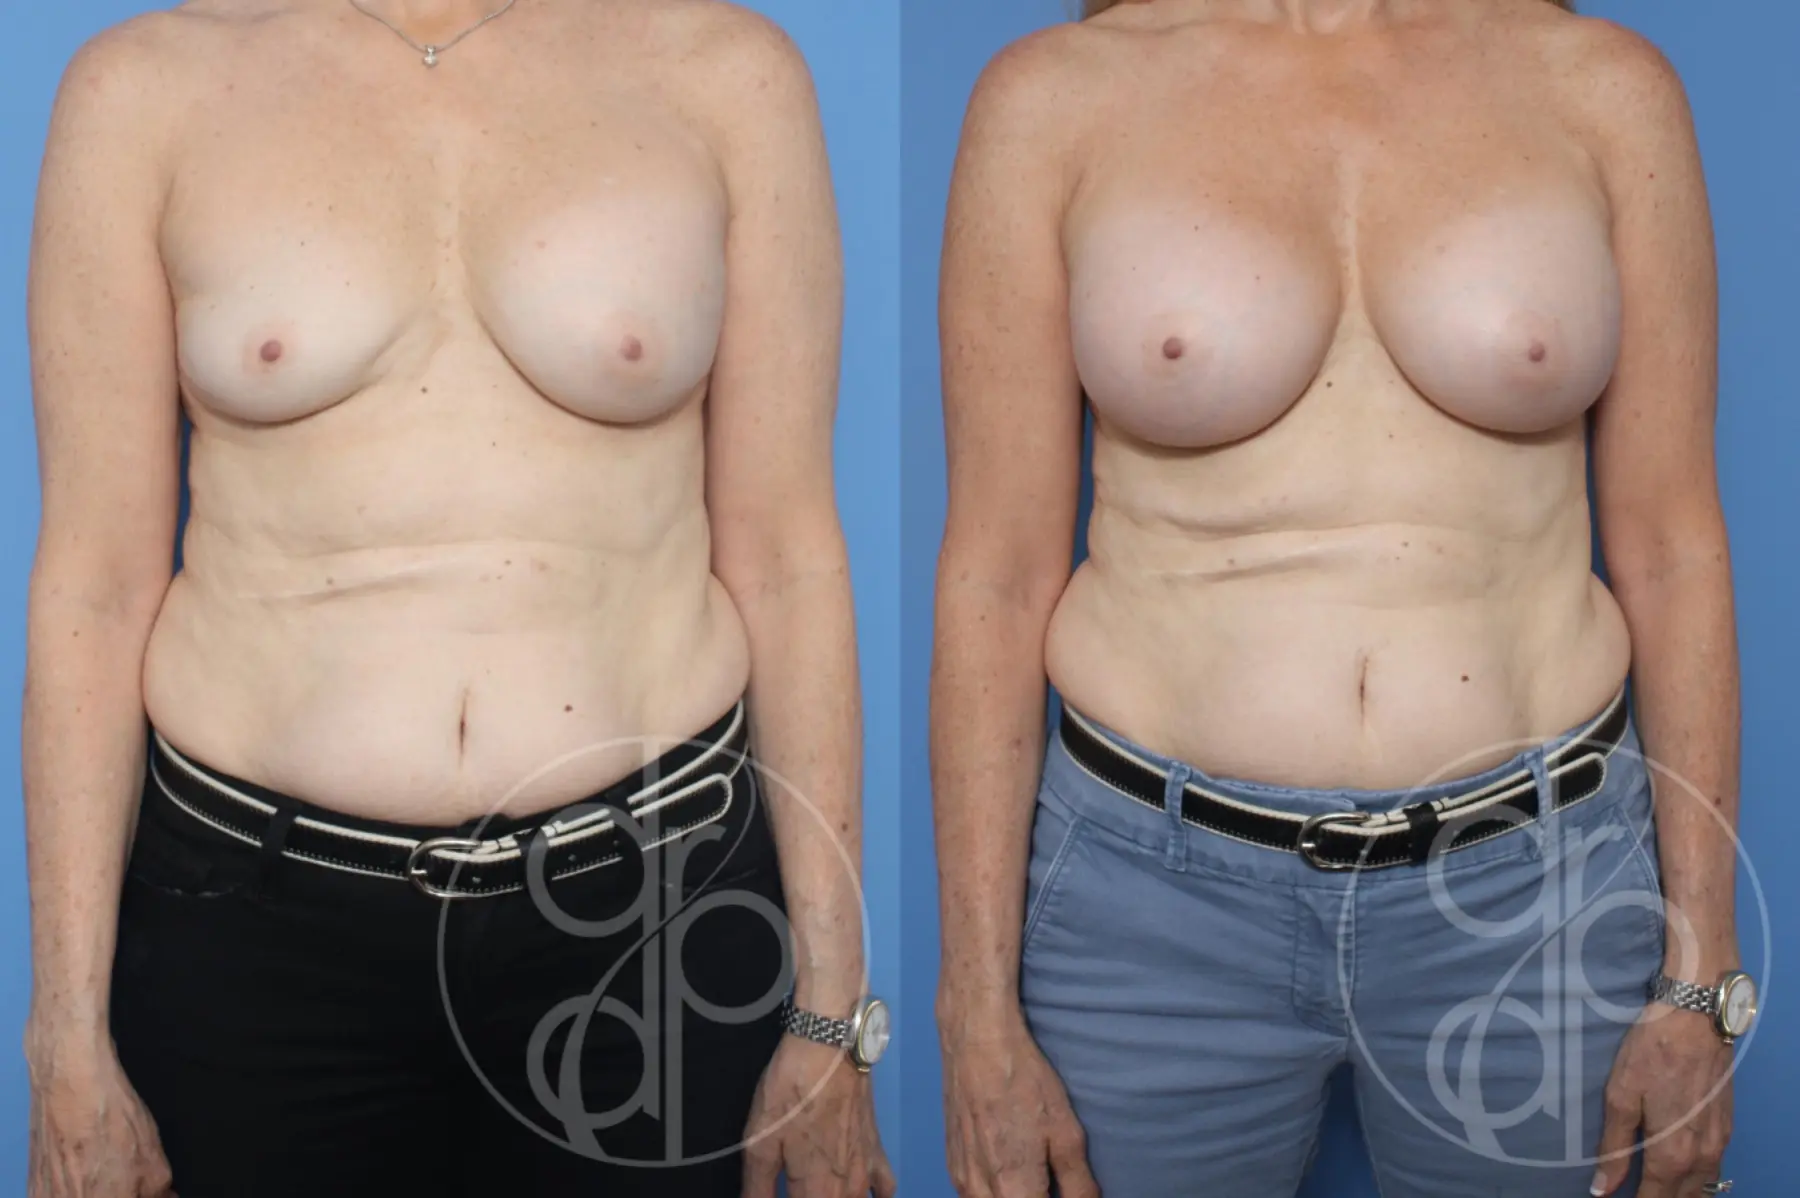 patient 12045 remove and replace breast implants before and after result - Before and After 1